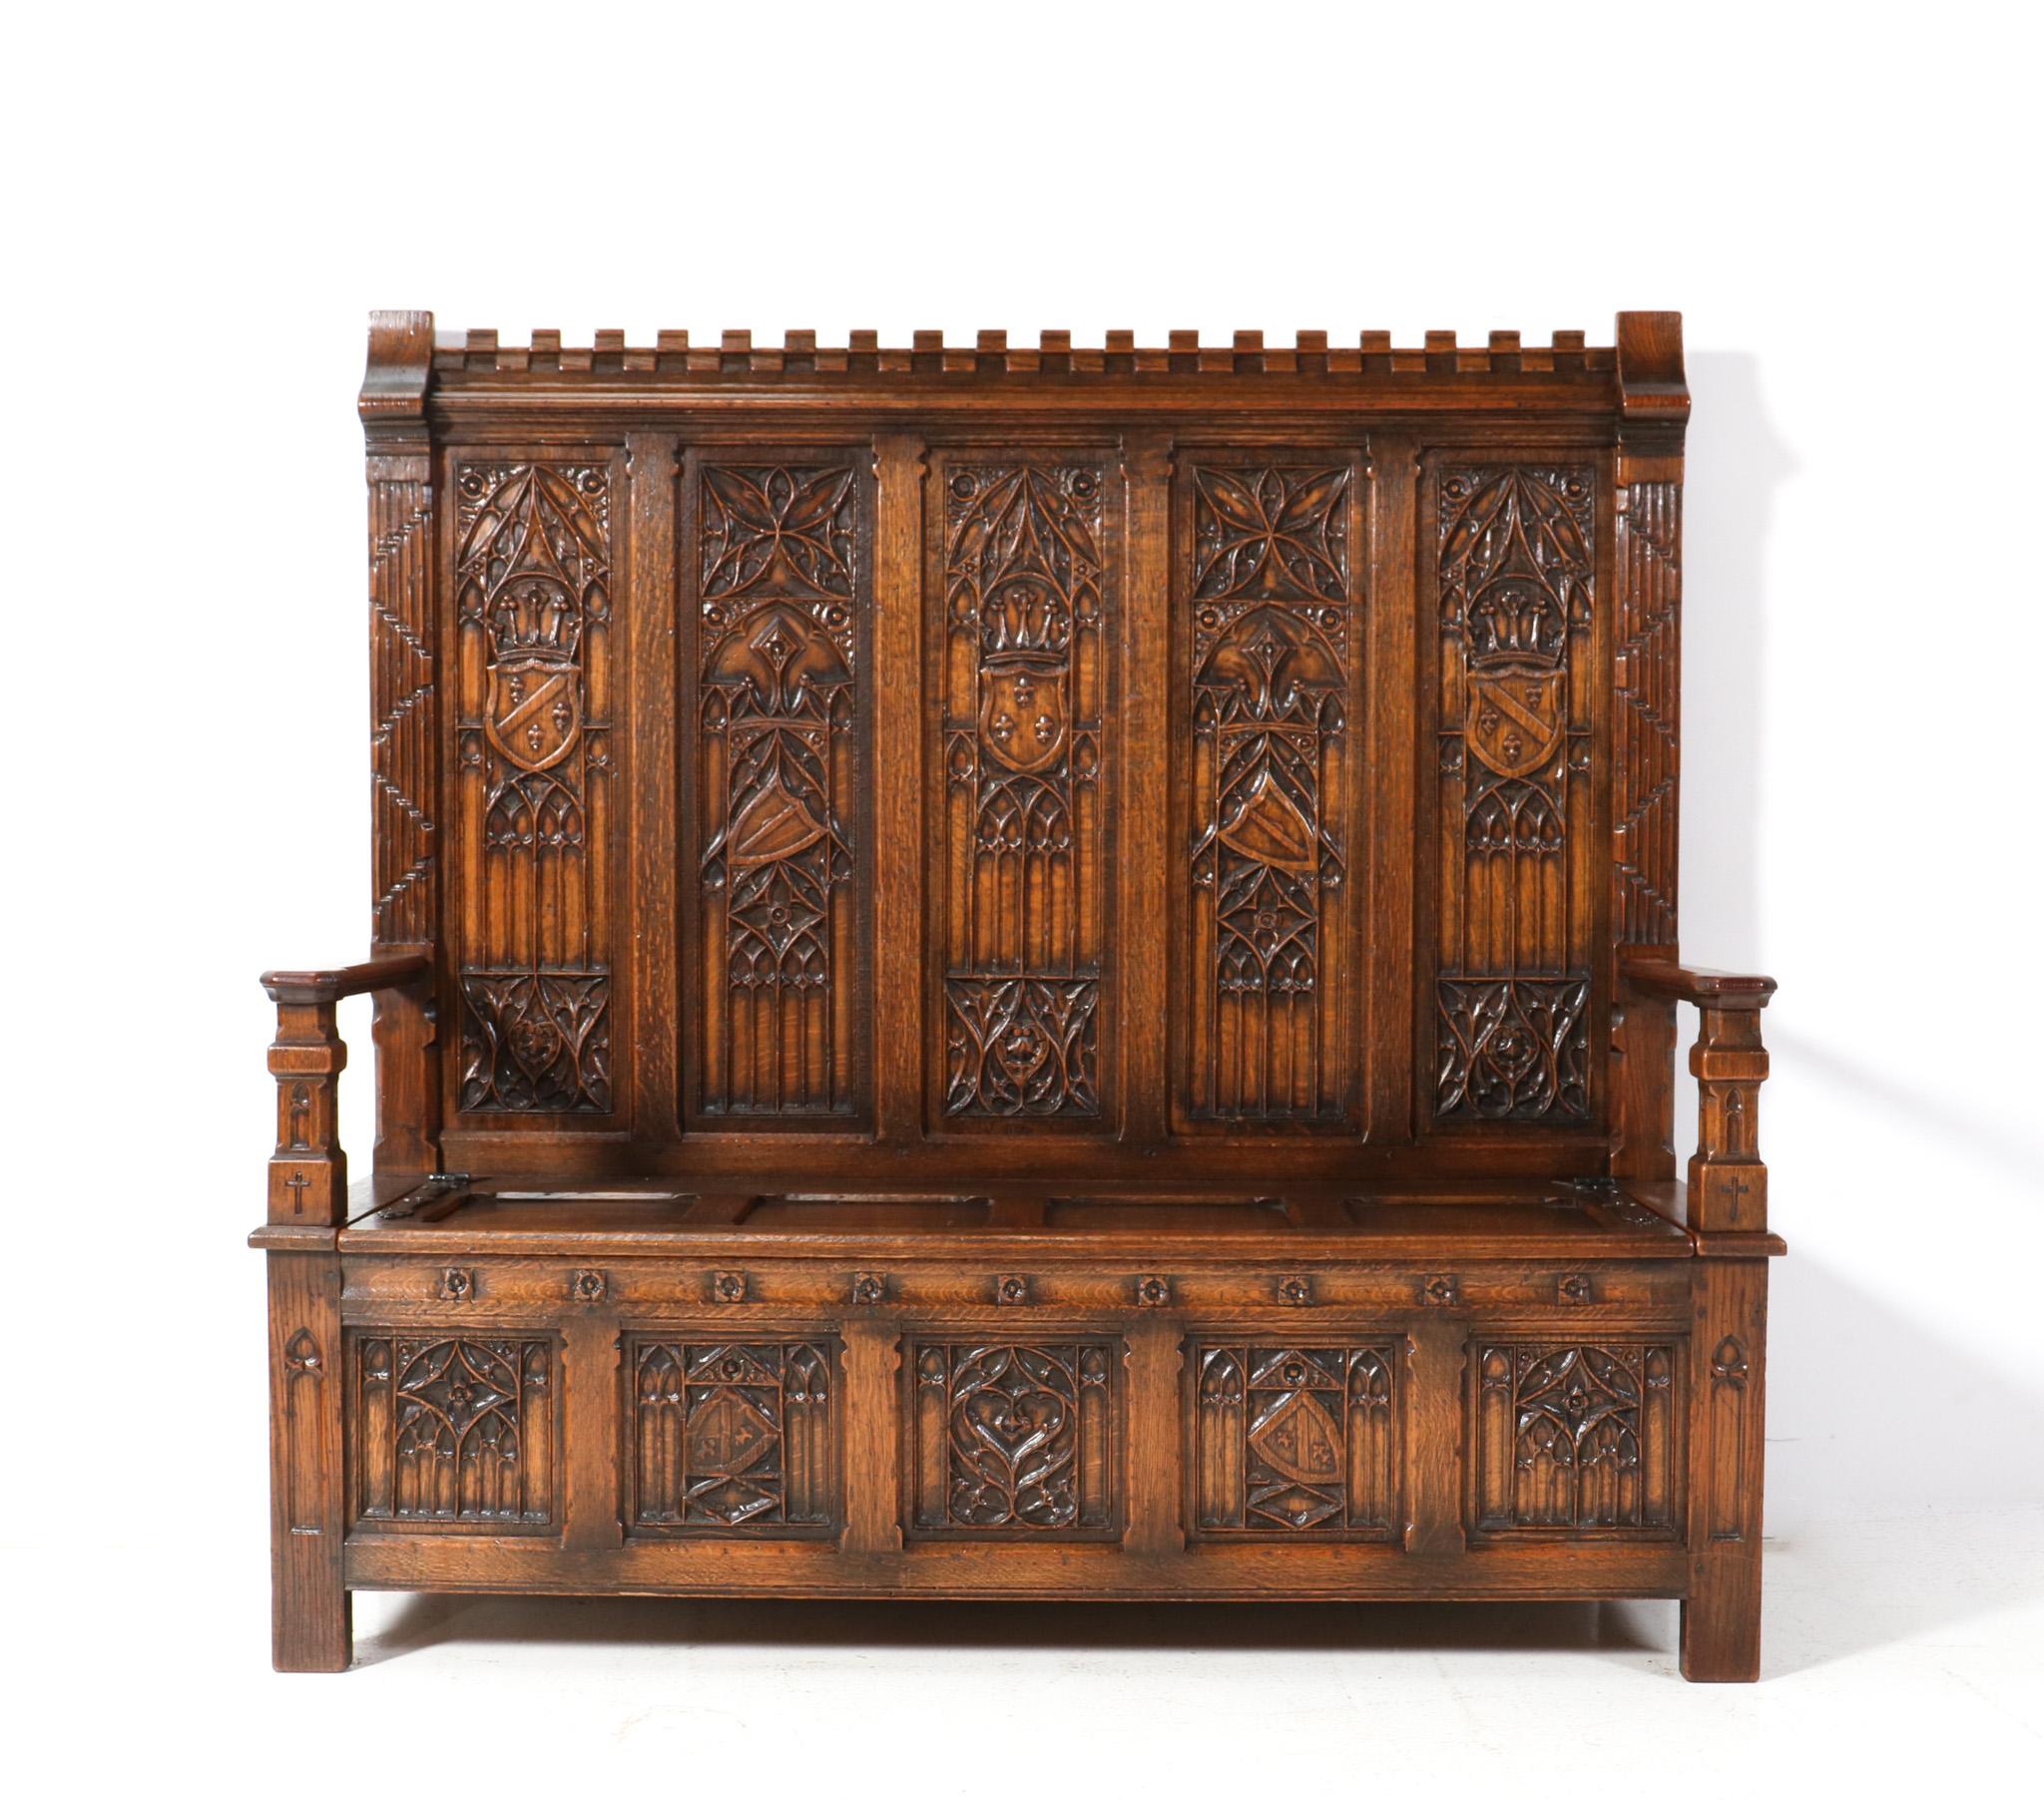 Magnificent and ultra rare Gothic Revival high back hall bench.
Striking Dutch design from the 1900s.
Solid oak frame with original hand-carved elements in the back and the sides!
Underneath the seat with the two original wrought iron hinges, you